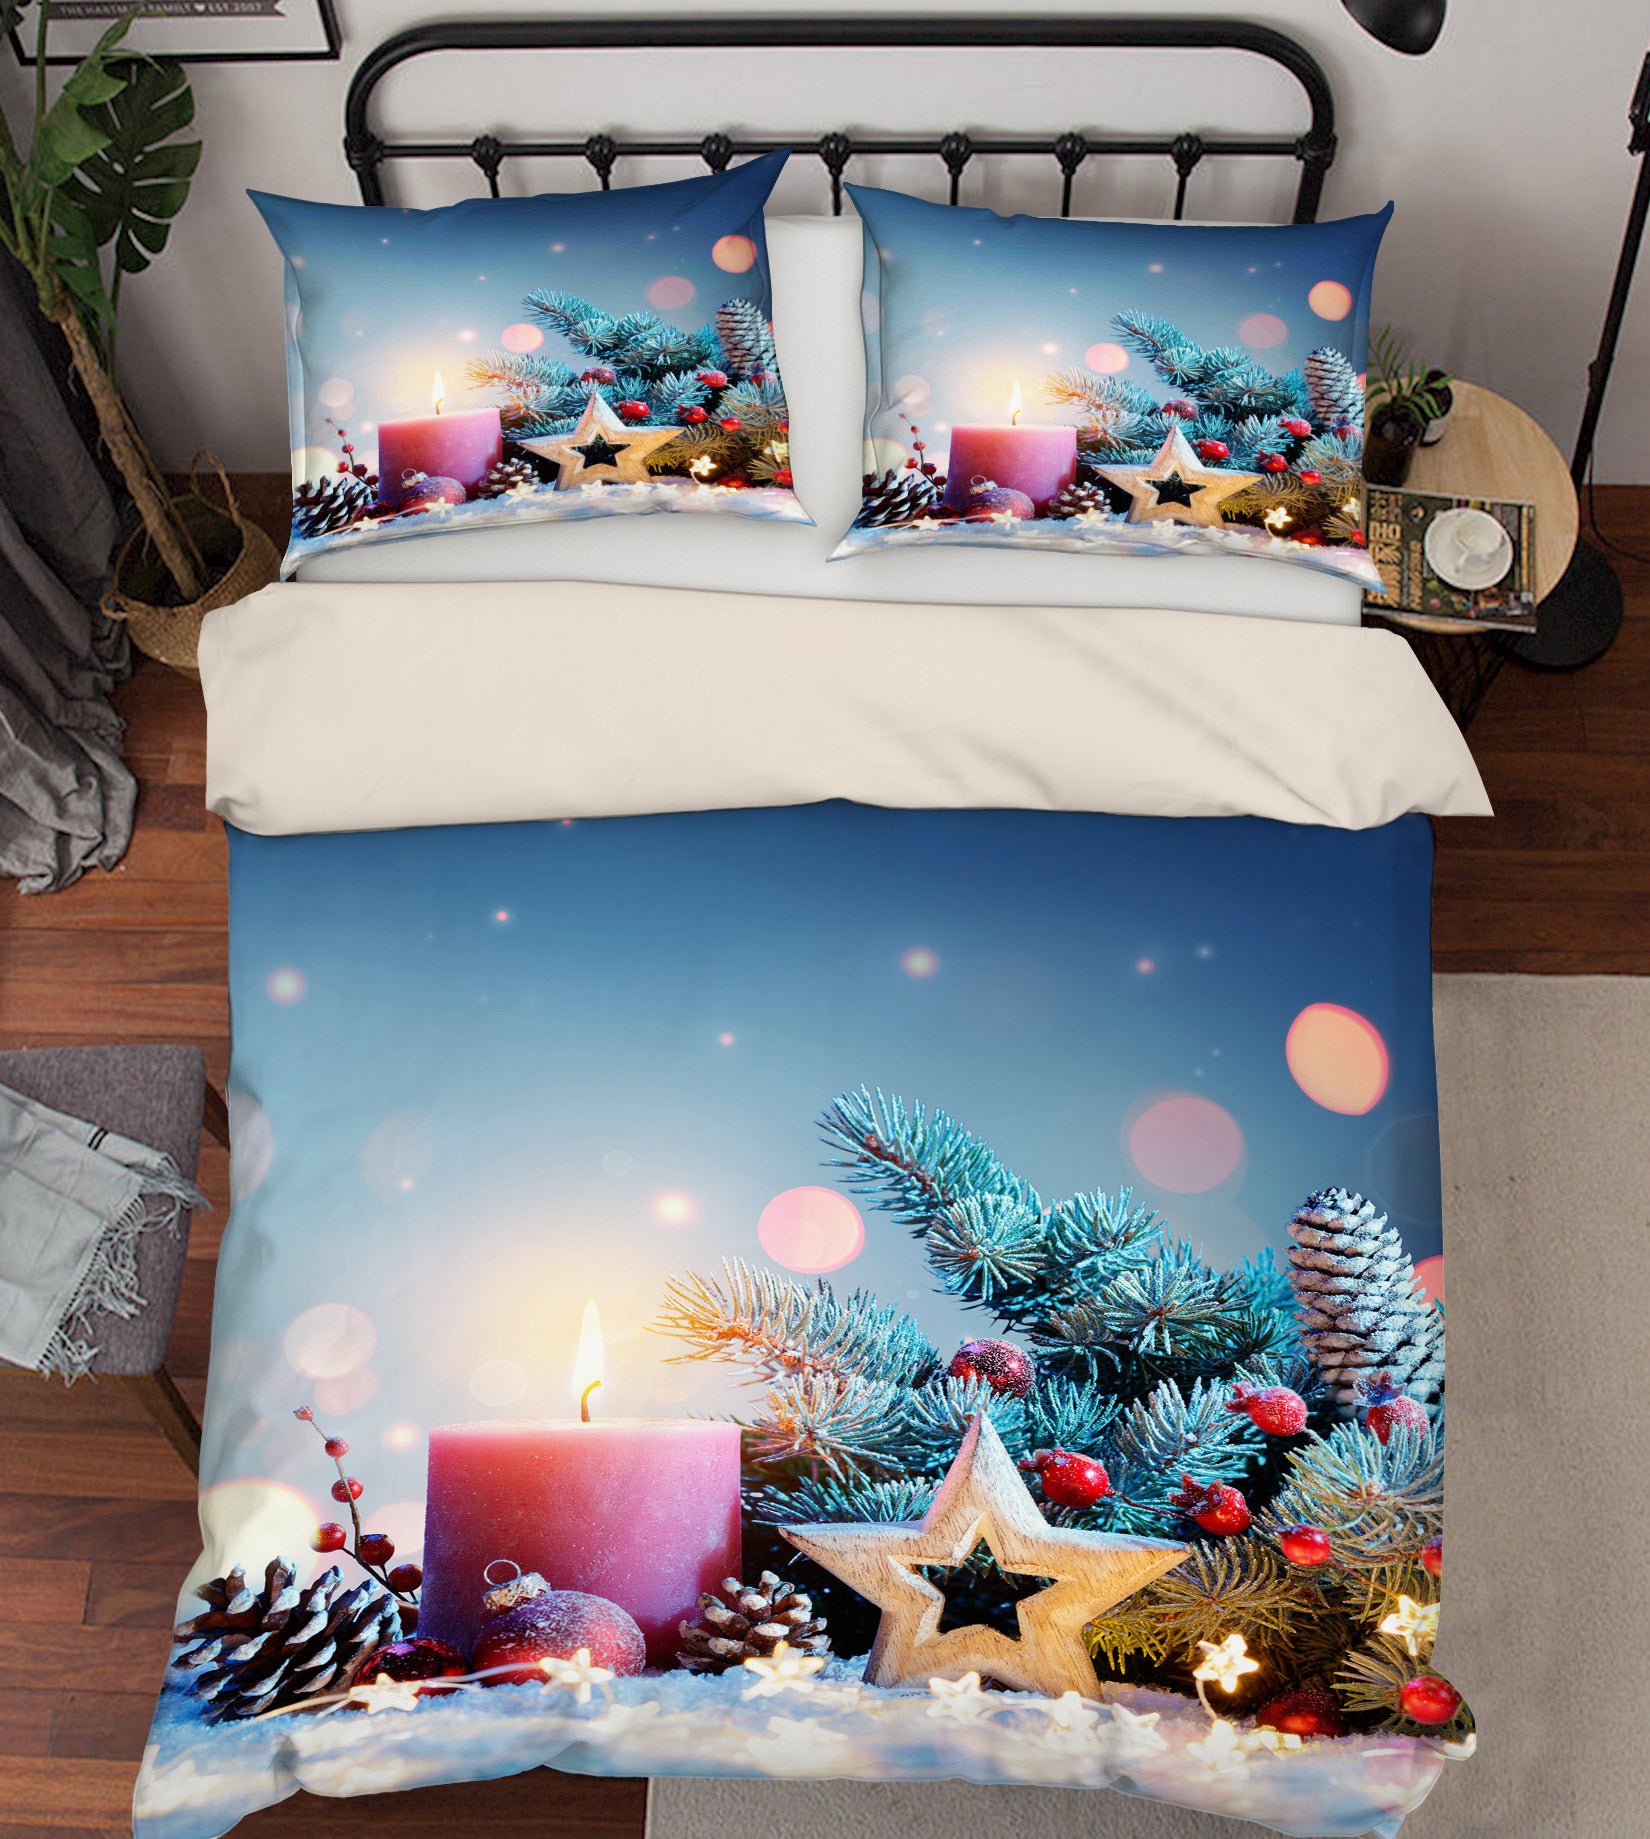 3D Candle Five-Pointed Star 52156 Christmas Quilt Duvet Cover Xmas Bed Pillowcases